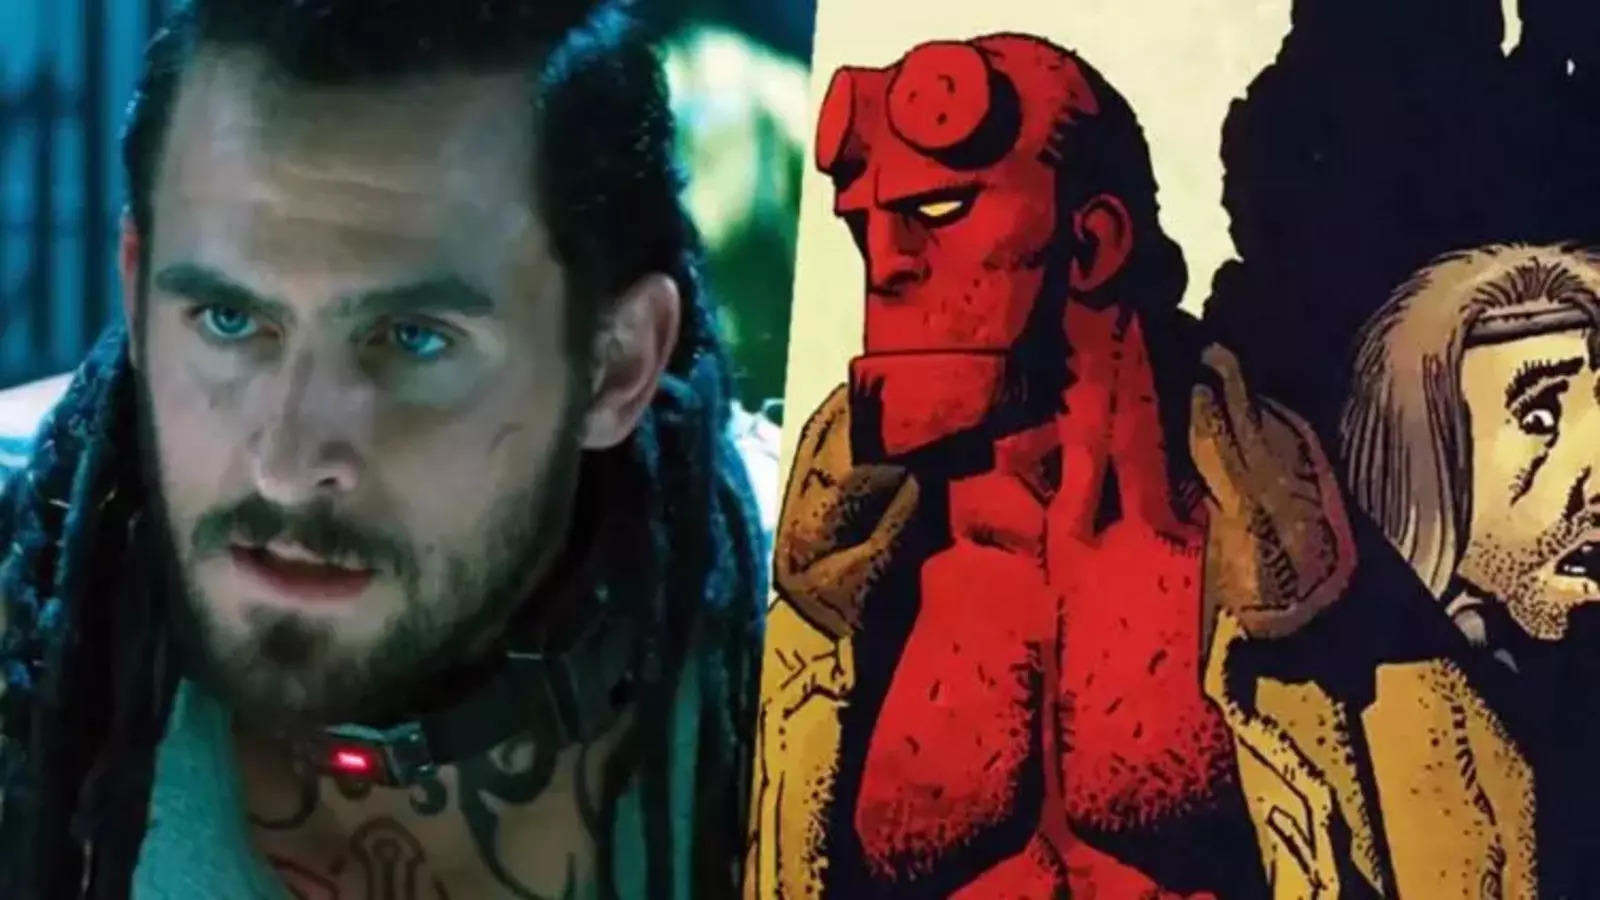 Hellboy: The Crooked Man: Here’s what we know about release date, trailer, cast and production team 